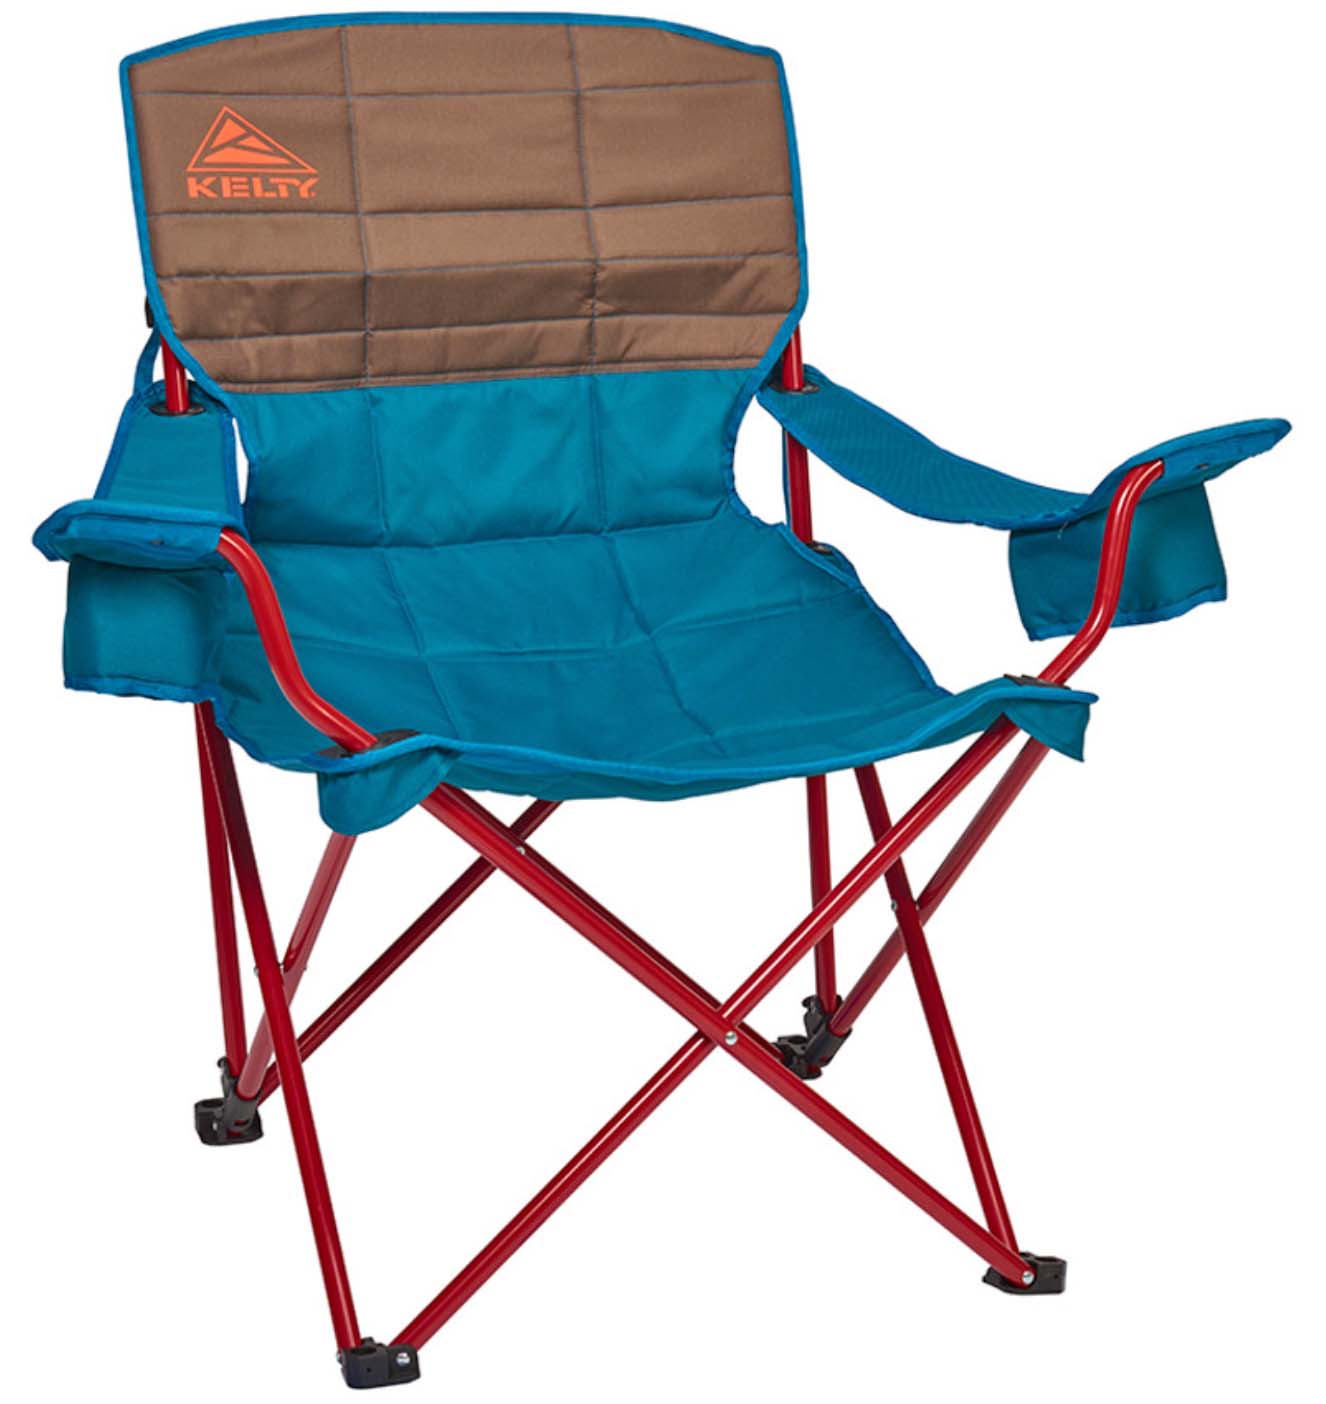 Store More® Dual Storage Deep Pocket Chair Pocket with Sit Upon